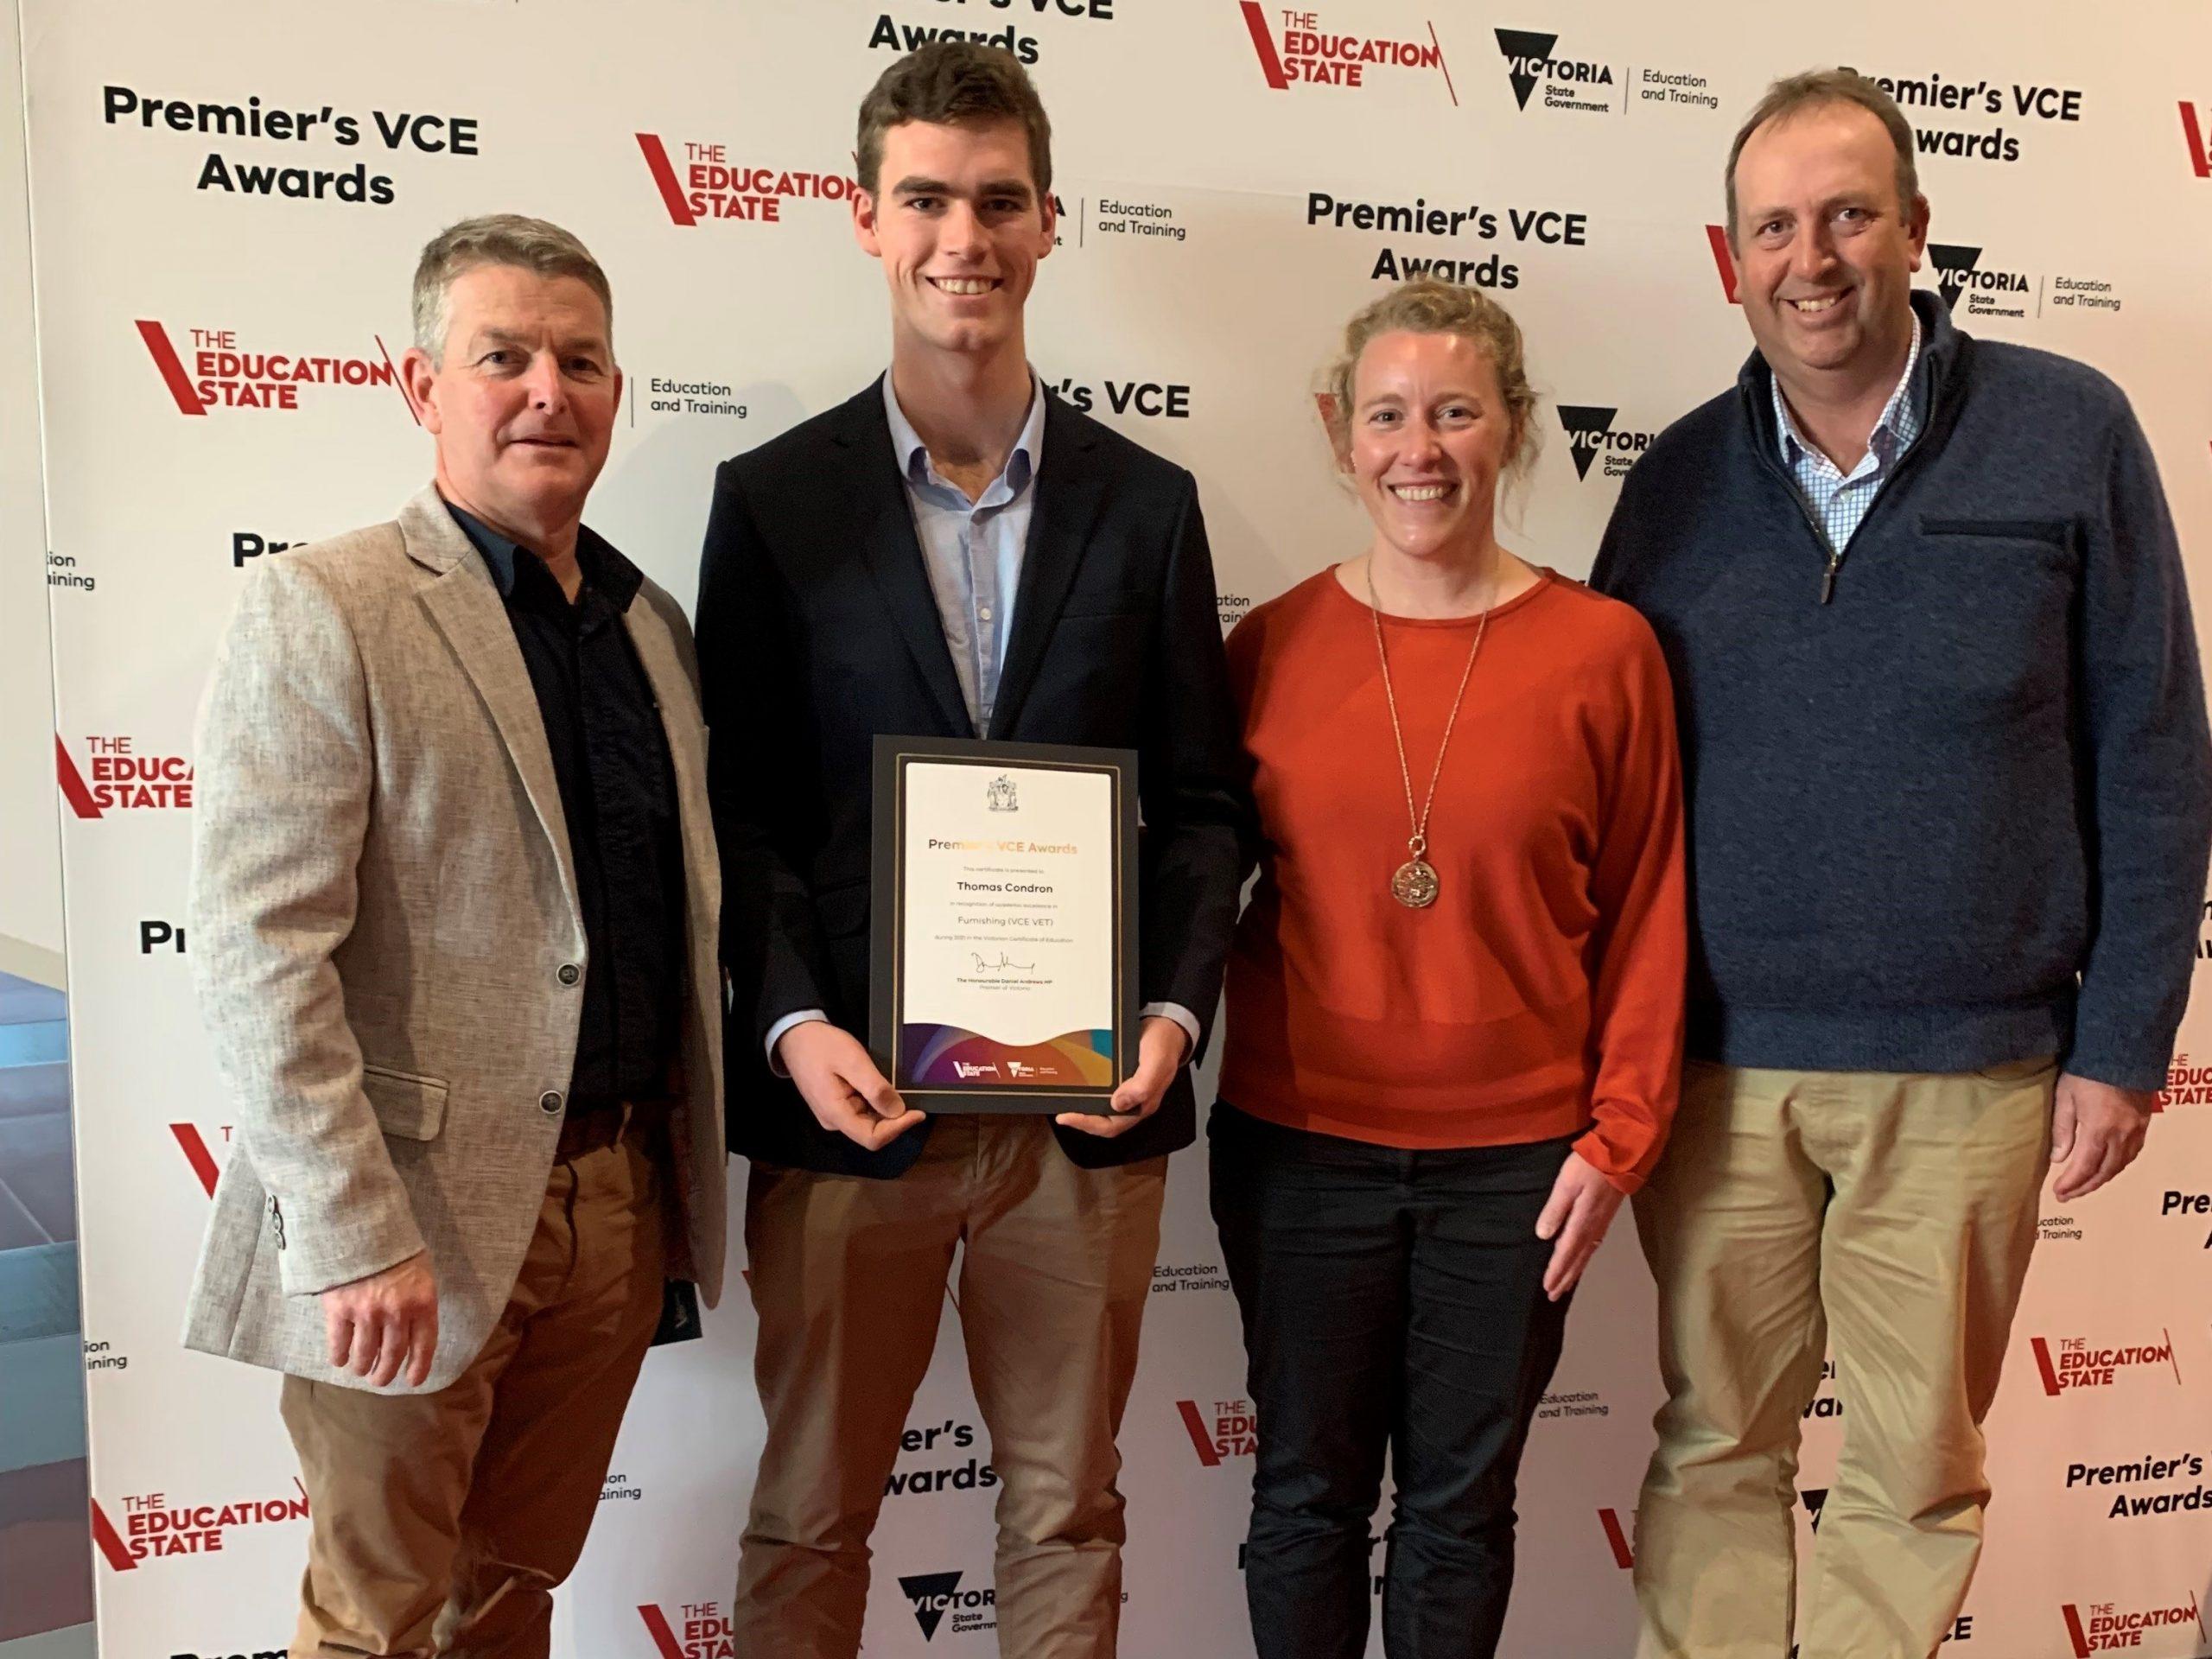 Gippsland Grammar Old Scholar Tom Condron at this week’s VCE Premier’s Awards with (from left to right) Gippsland Grammar Furnishing teacher Nick Kuch and parents Ellen and Gary Condron.